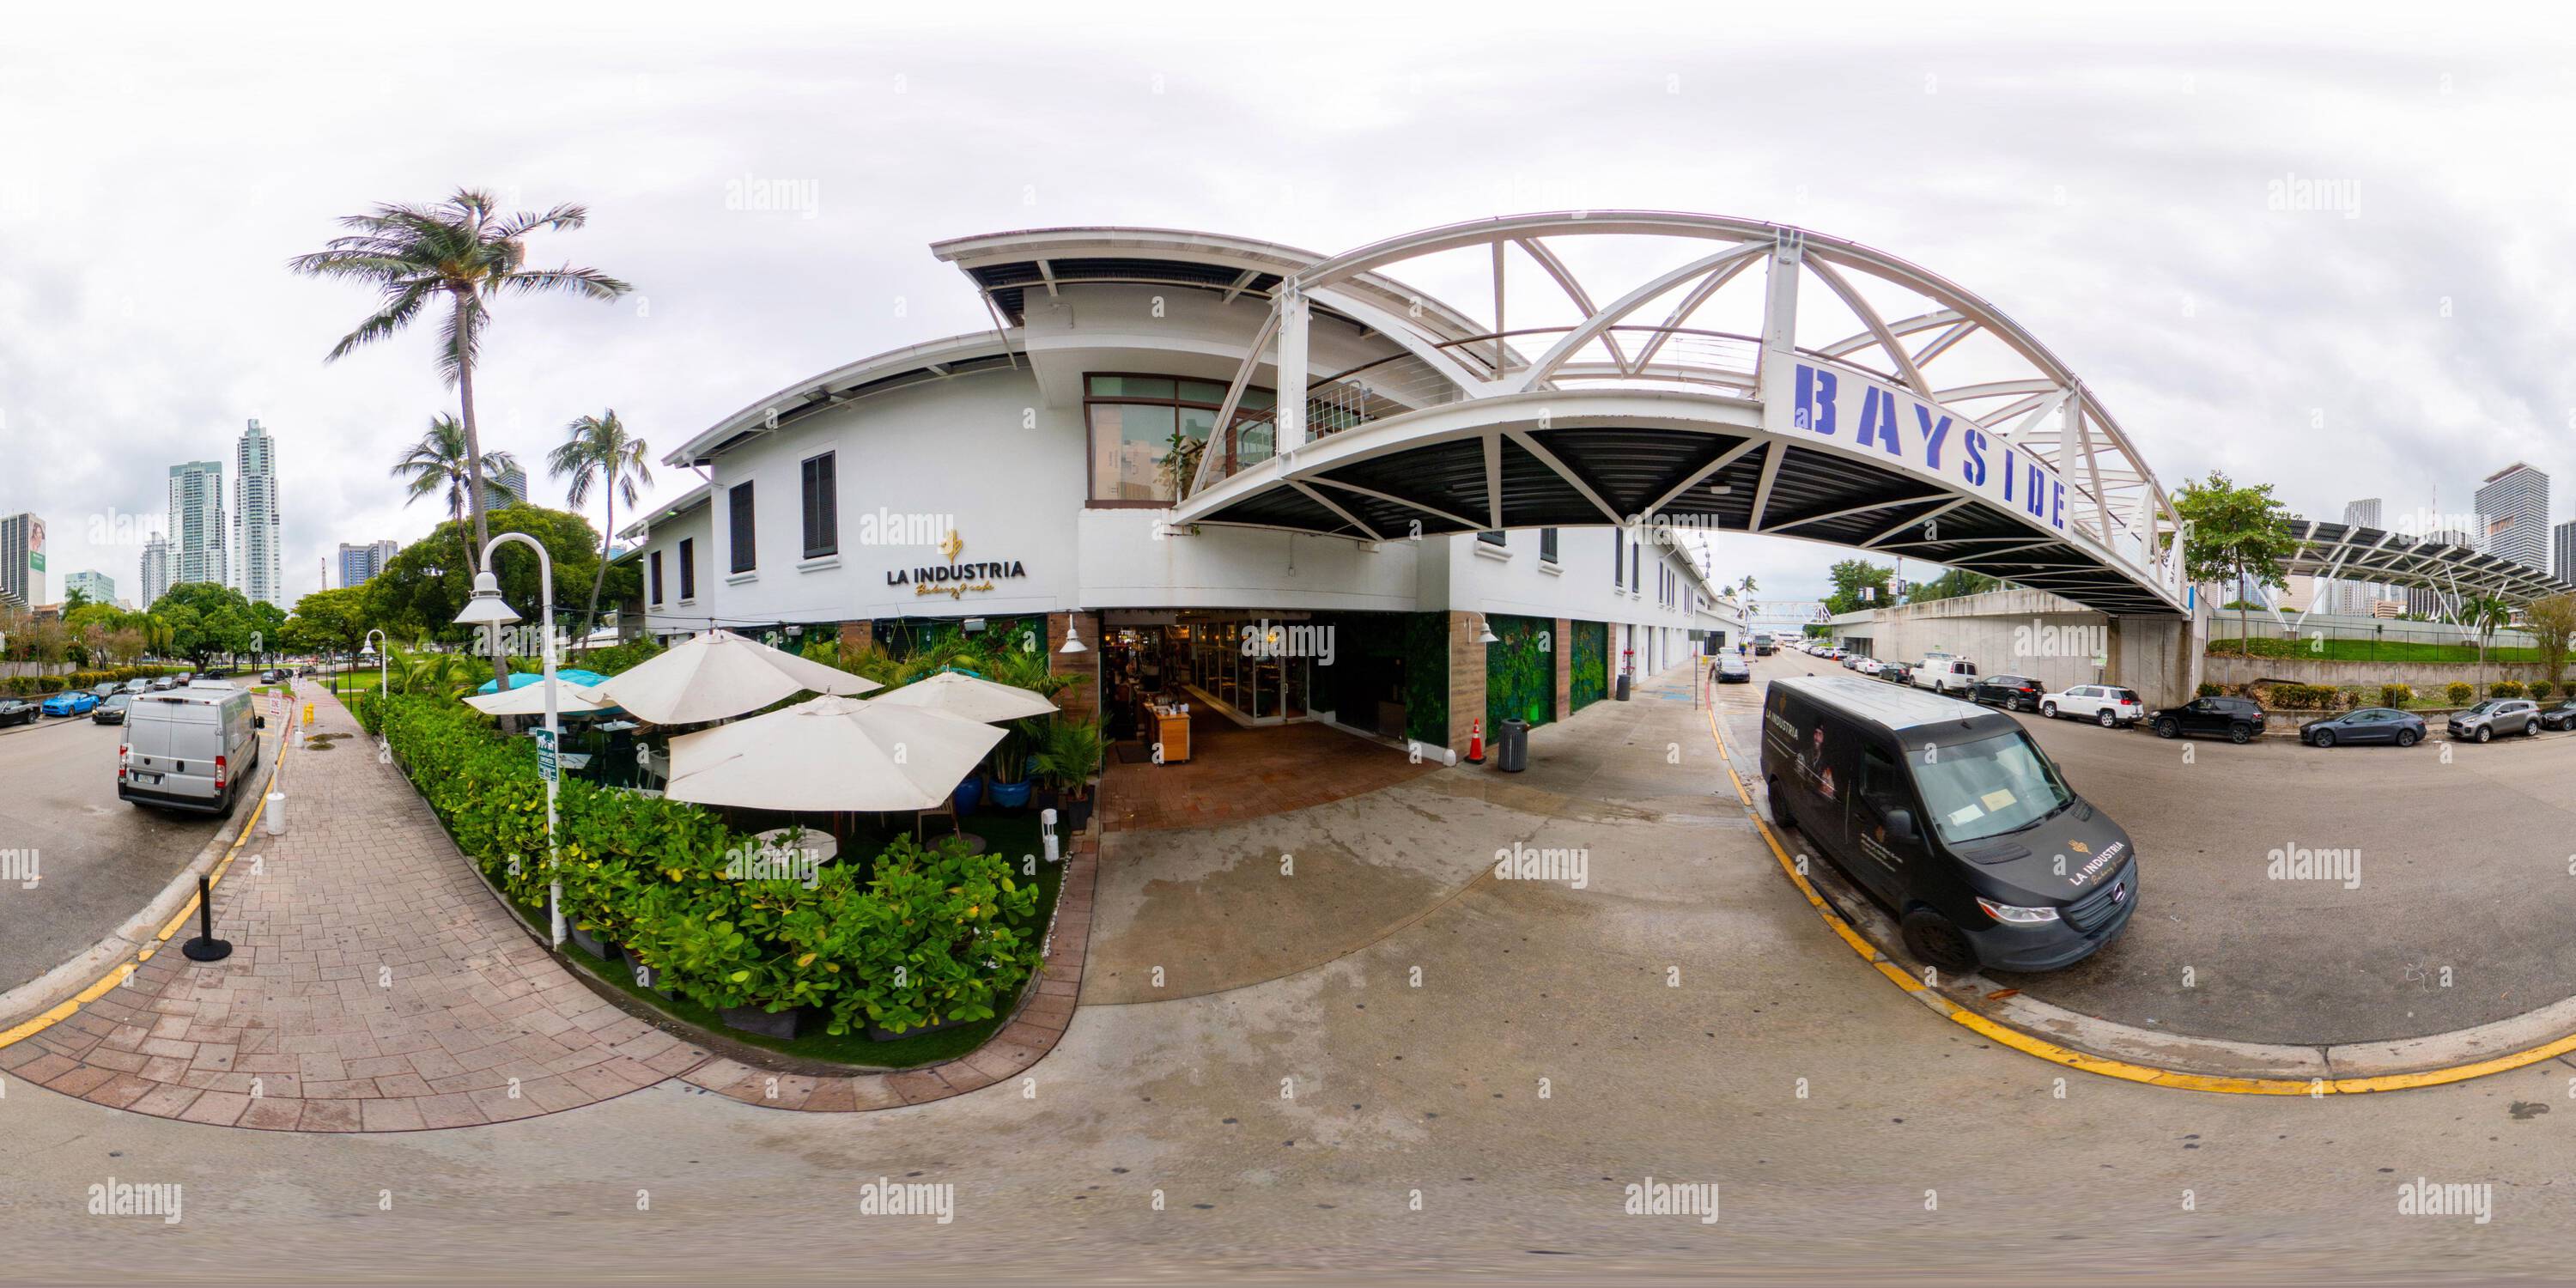 360 degree panoramic view of Miami, FL, USA - October 6, 2023: 360 equirectangular photo Bayside Marketplace La Industria bakery and cafe